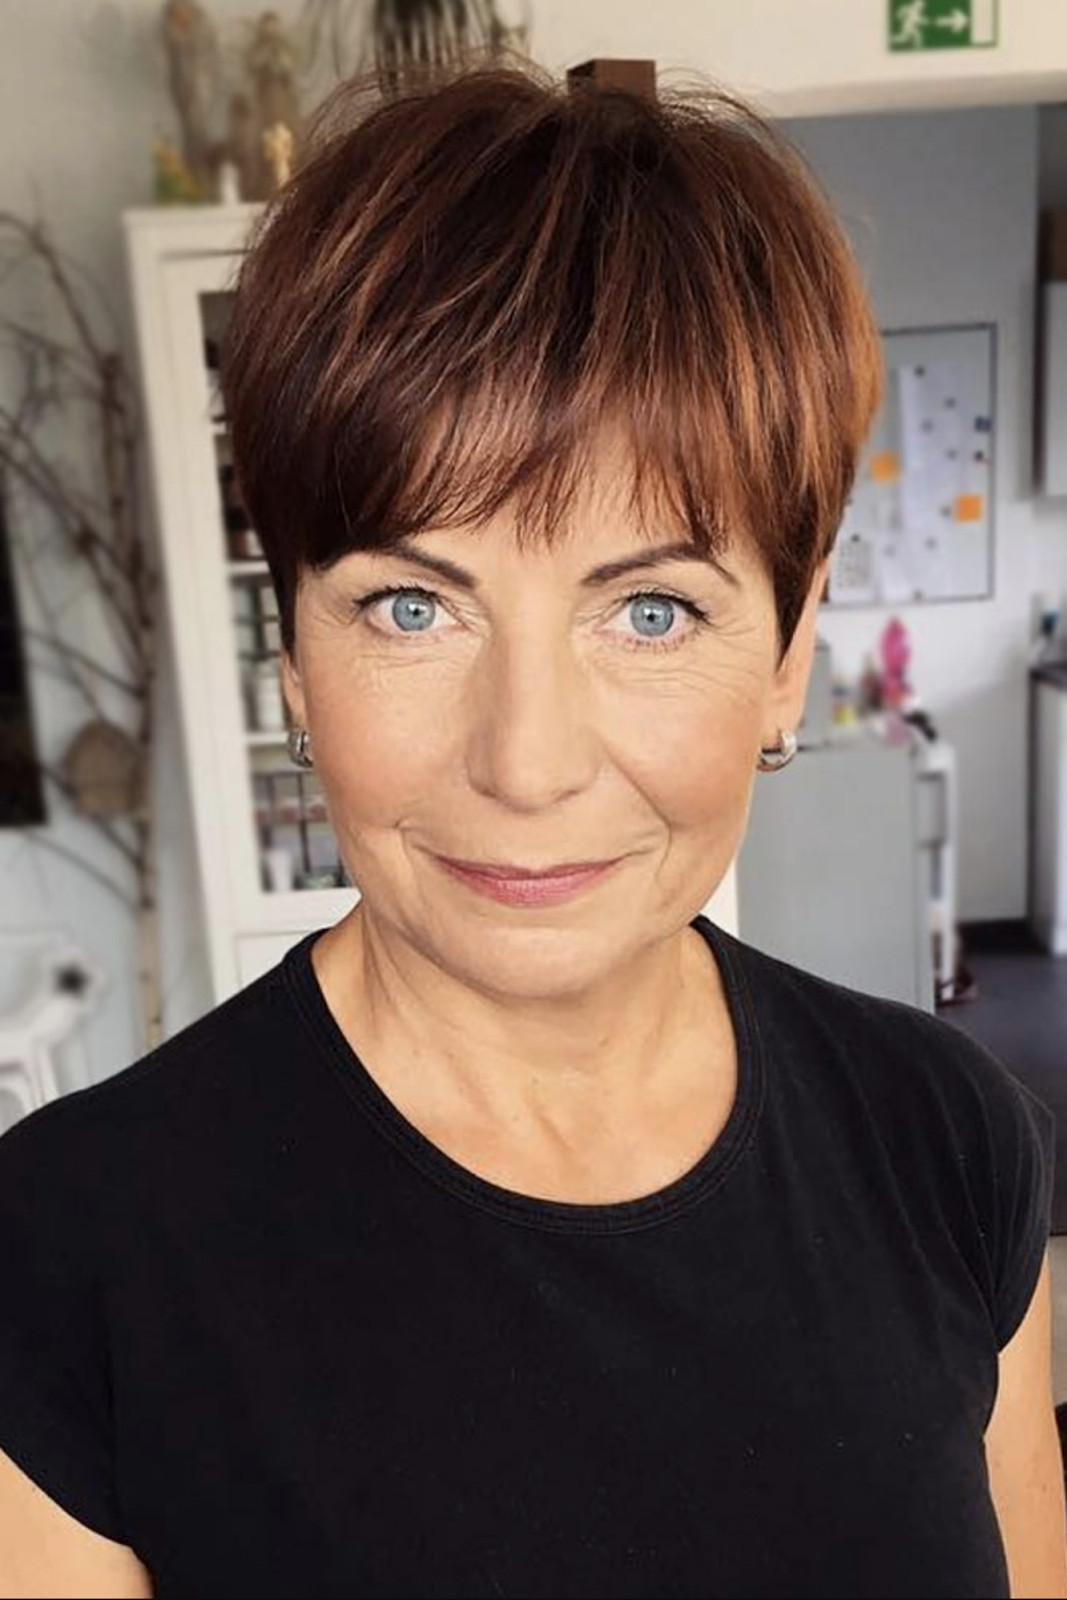 2020 Short Haircuts For Women
 2019 2020 Short Hairstyles for Women Over 50 That Are